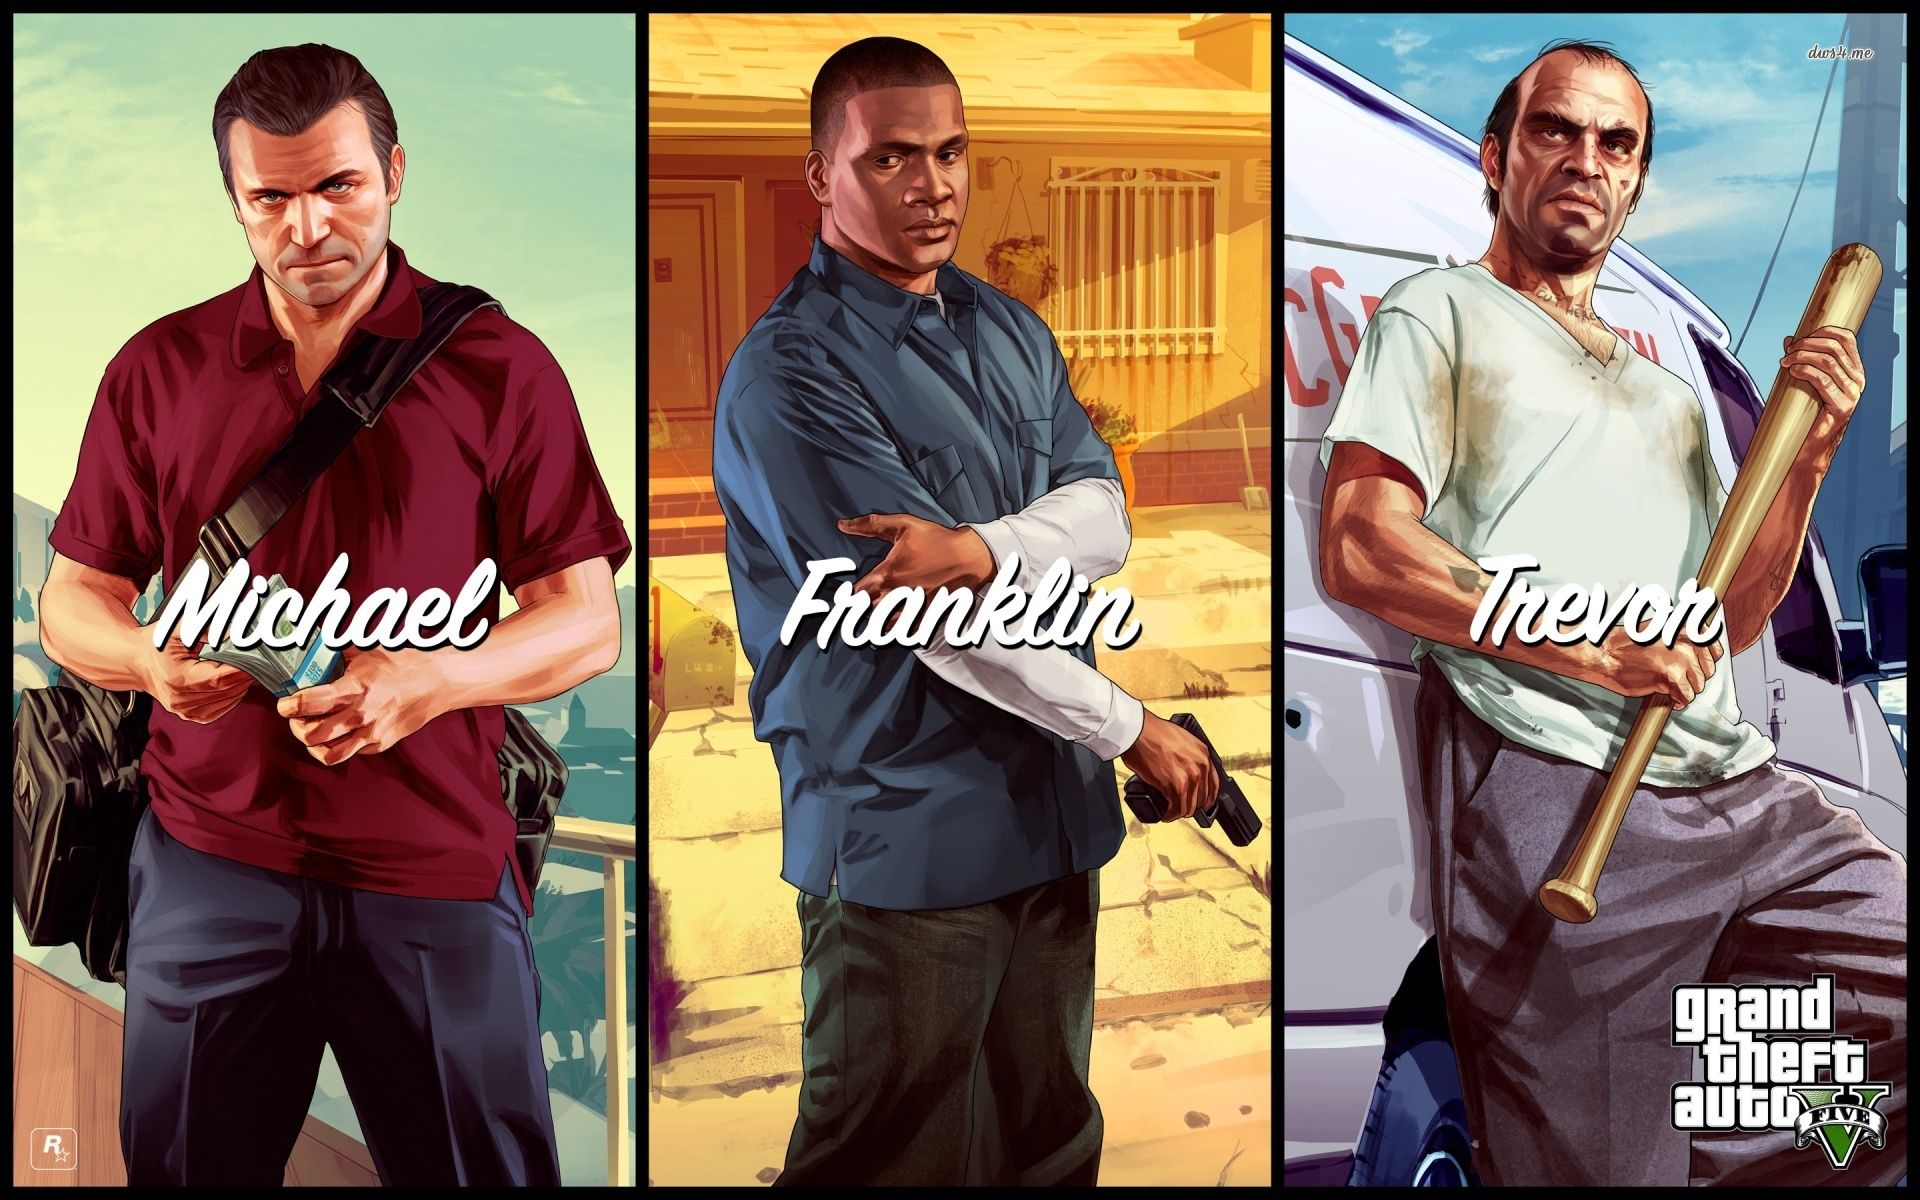 Lovely Grand Theft Auto V Wallpaper Full HD Pictures